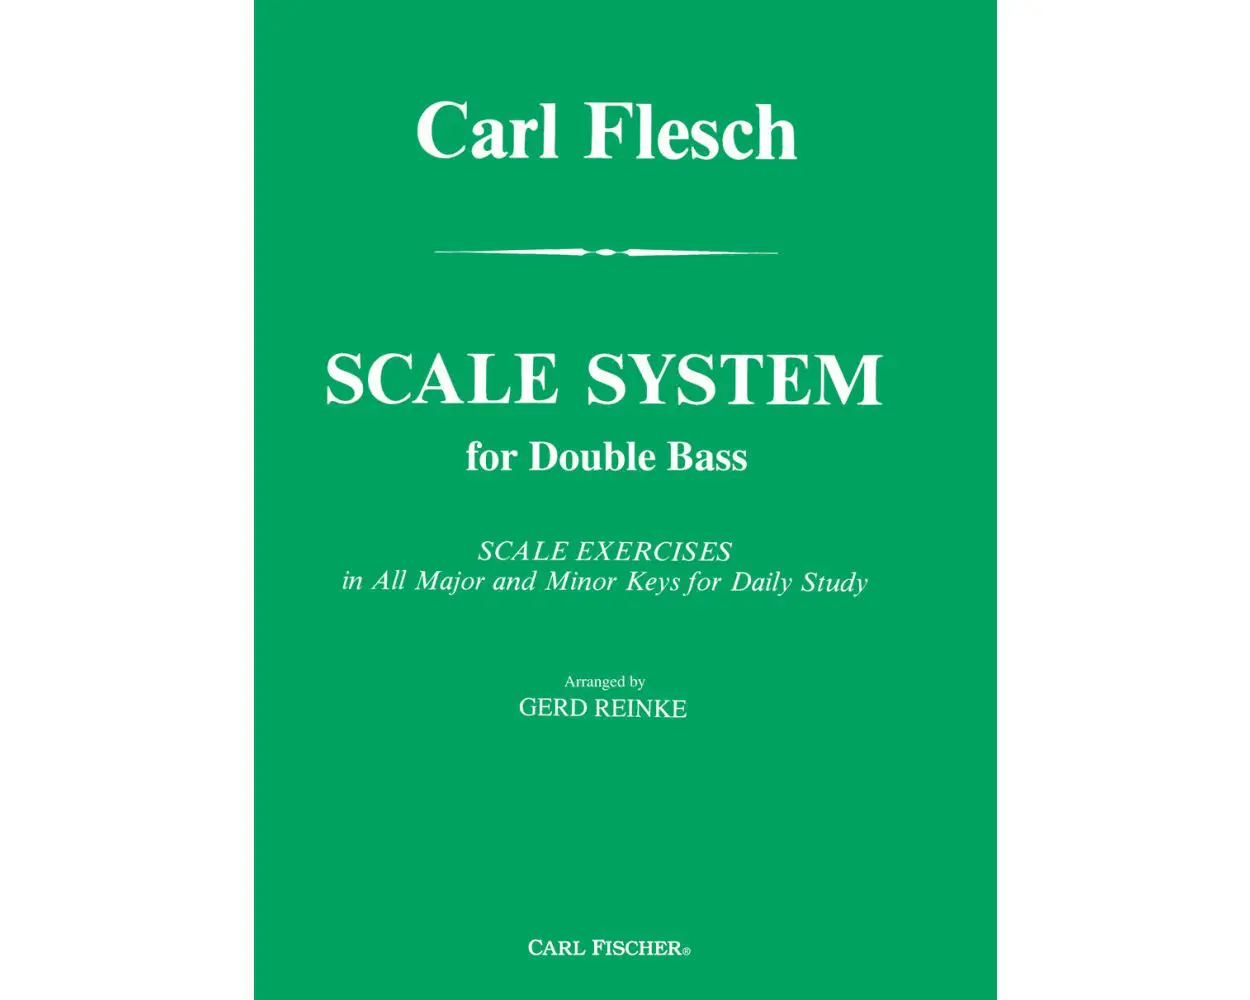 A book by Carl Flesh Scale System For Double Bass